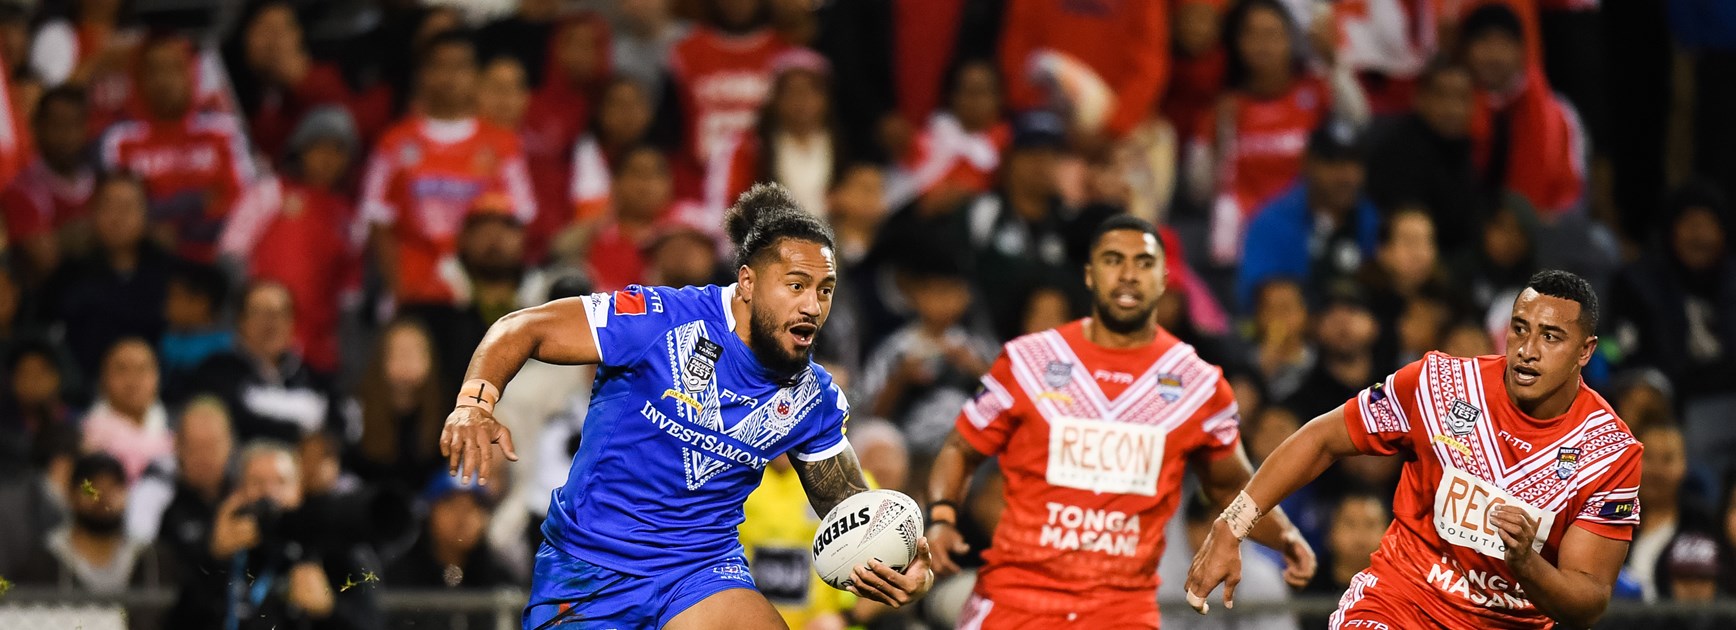 Double honours for Taufua